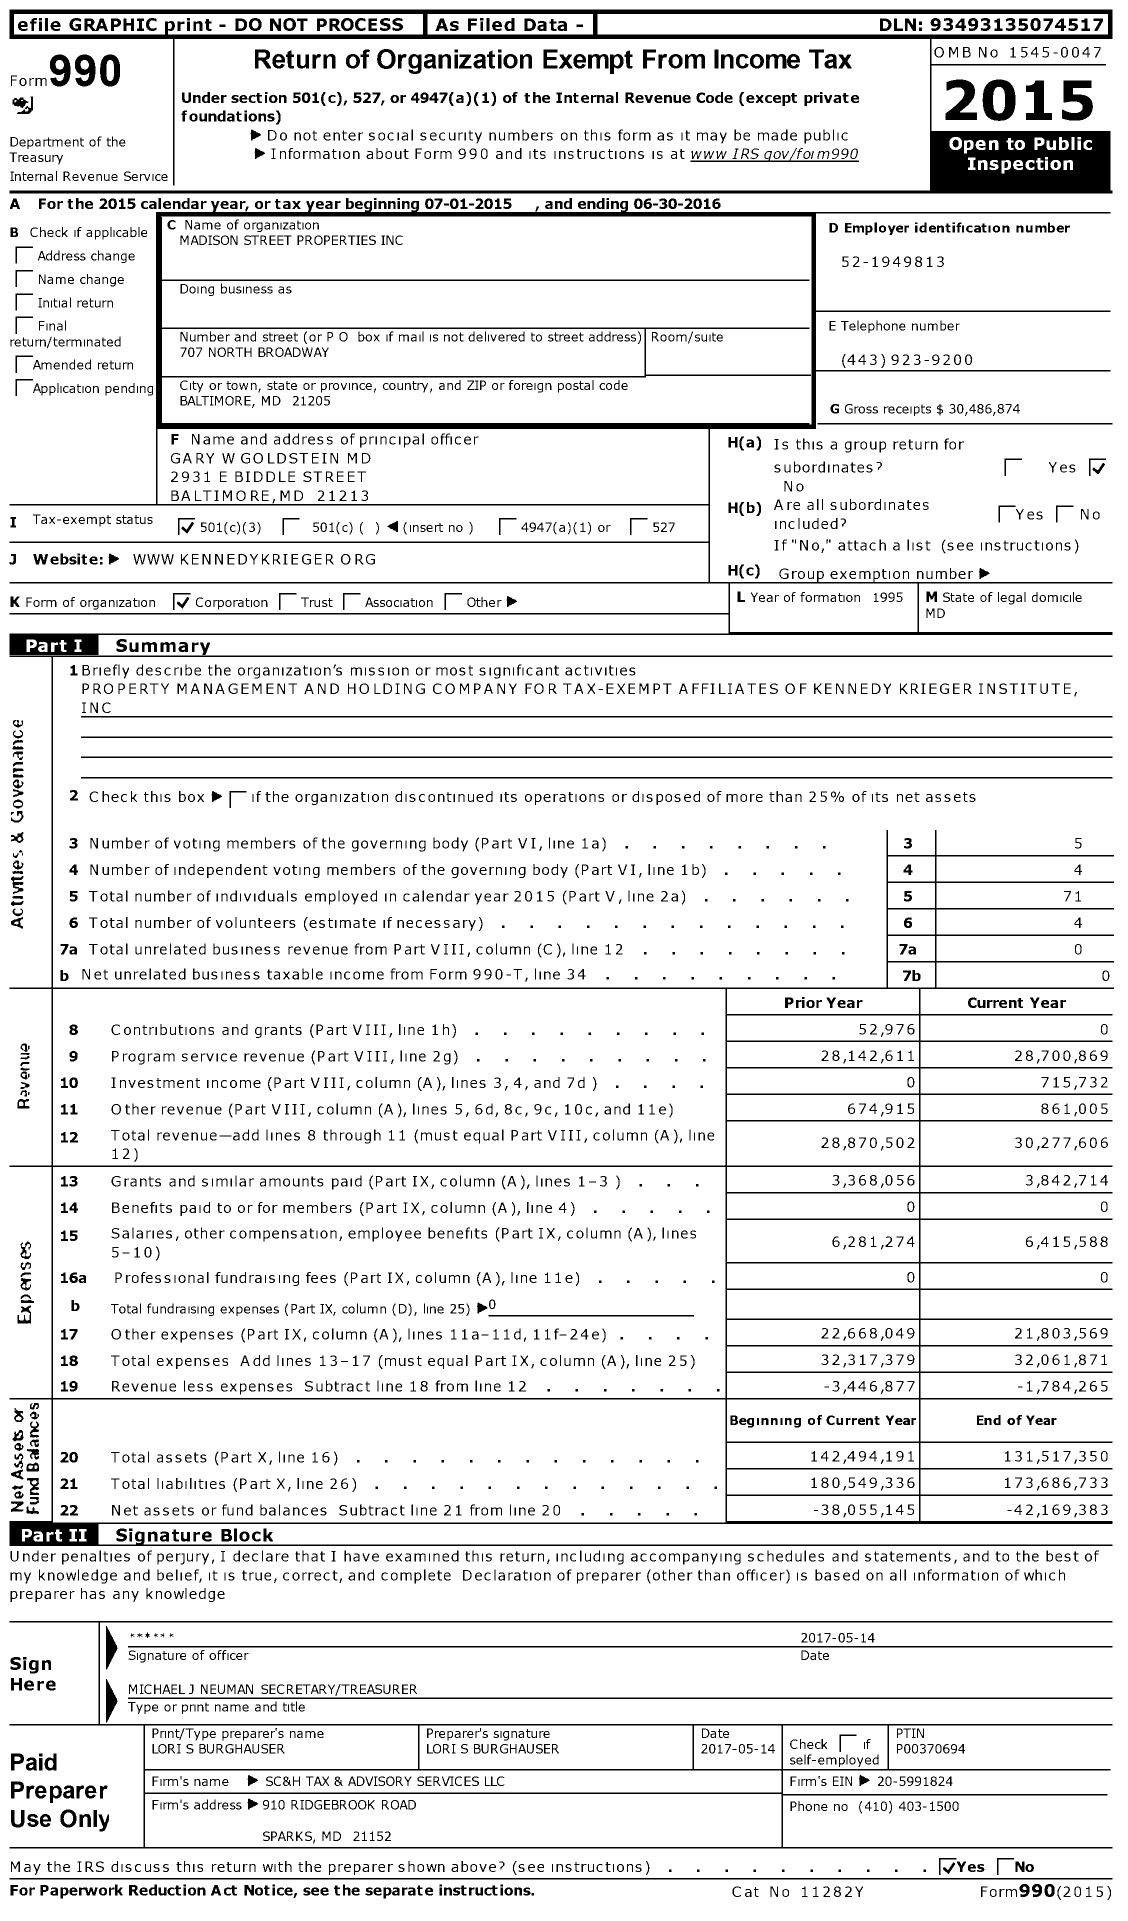 Image of first page of 2015 Form 990 for Madison Street Properties